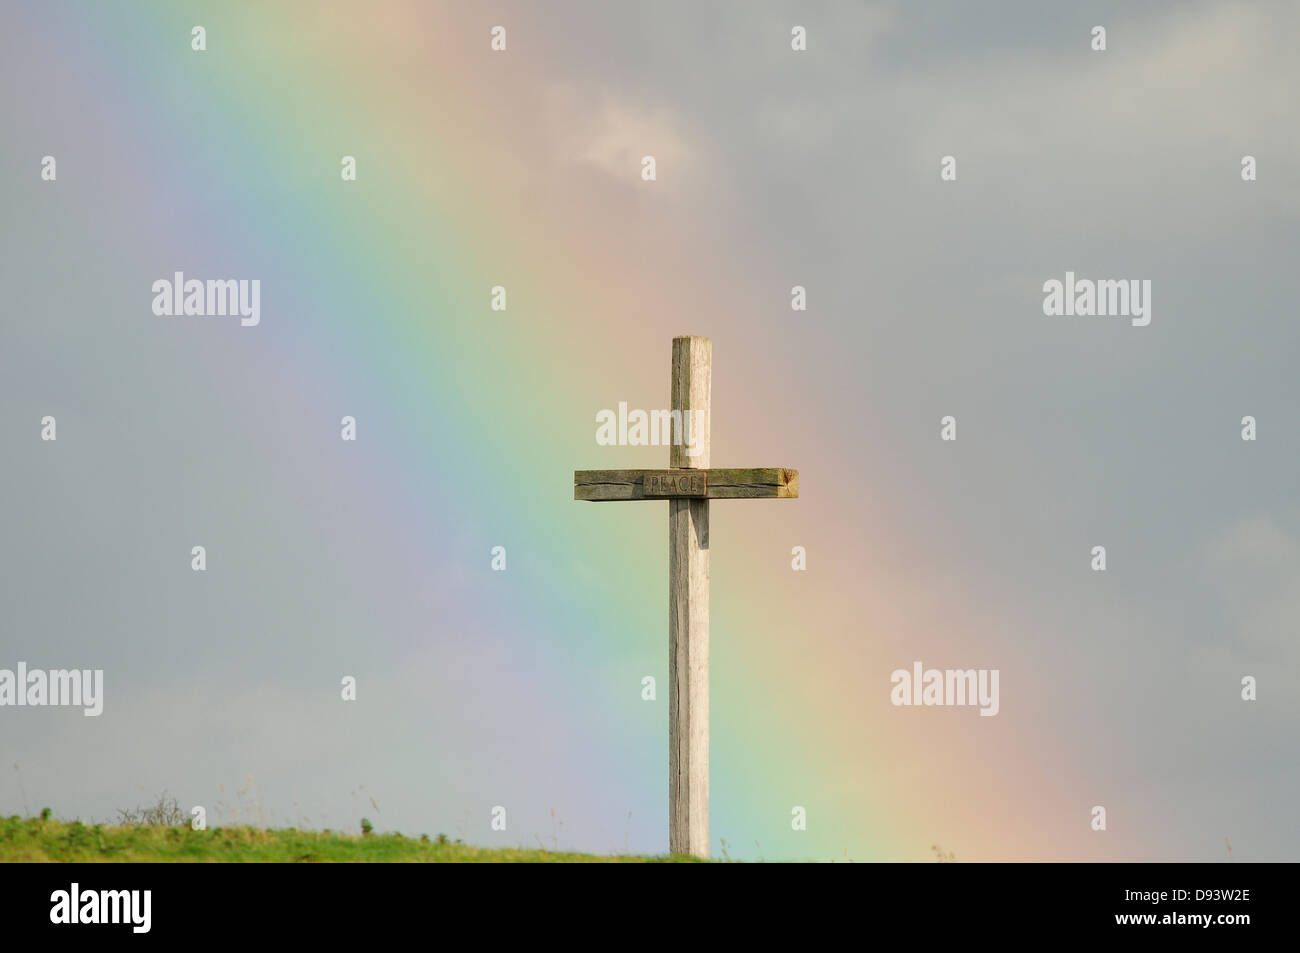 Large wooden cross in a field with a rainbow in background Stock Photo